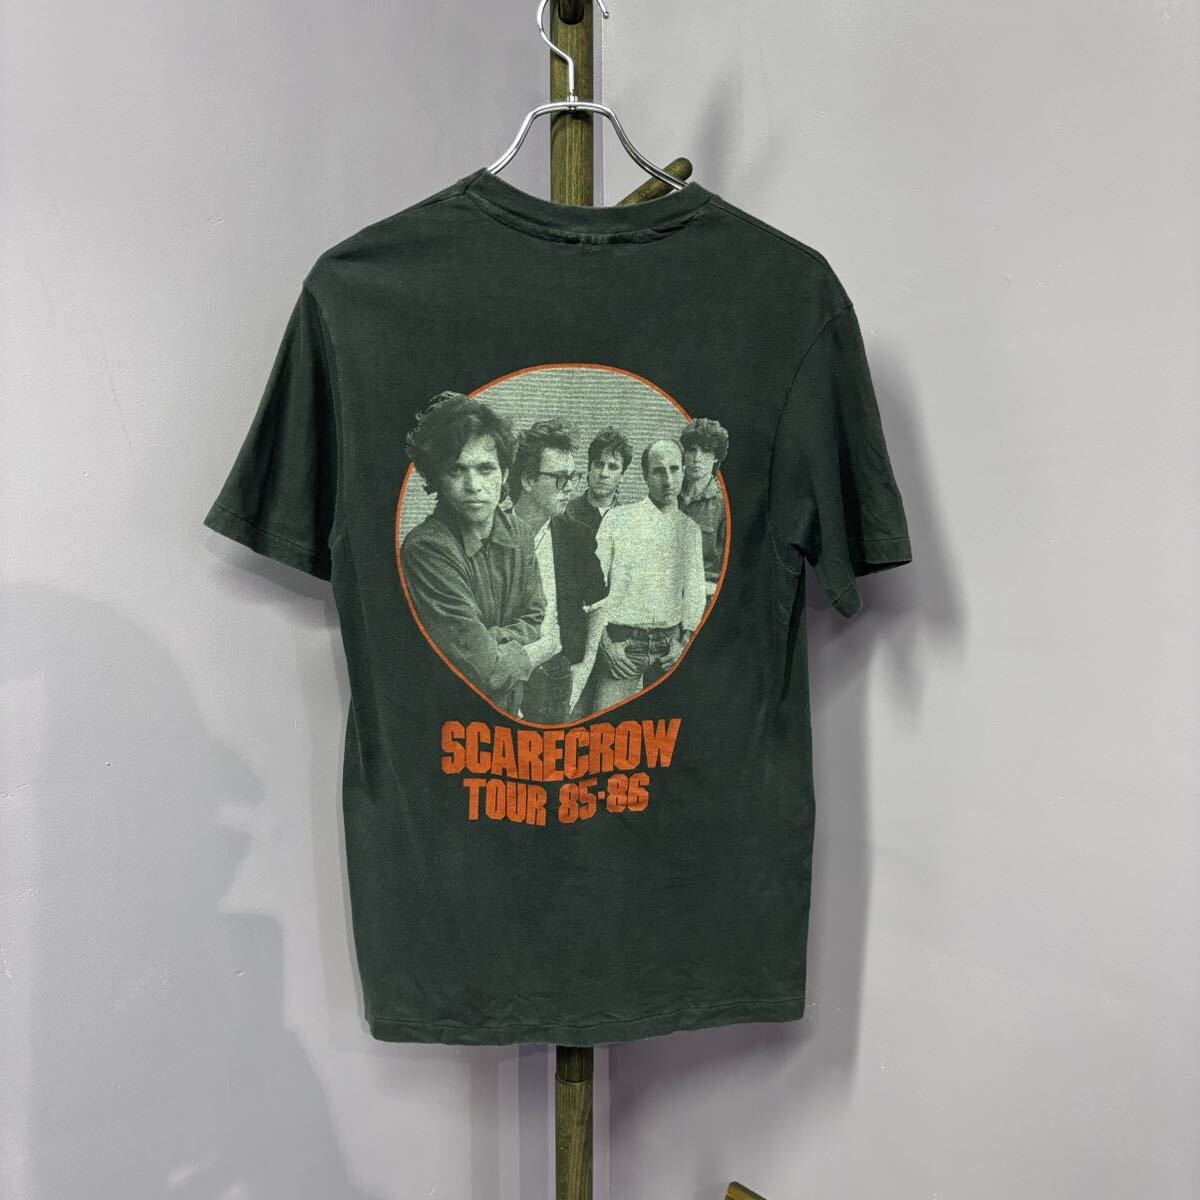 80’s USA製　JOHN COUGER MELLENCAMP SCARECROW ジョンメレンキャンプ　スケアクロウ　バンド　ロック　Tシャツ 古着　アメリカ古着